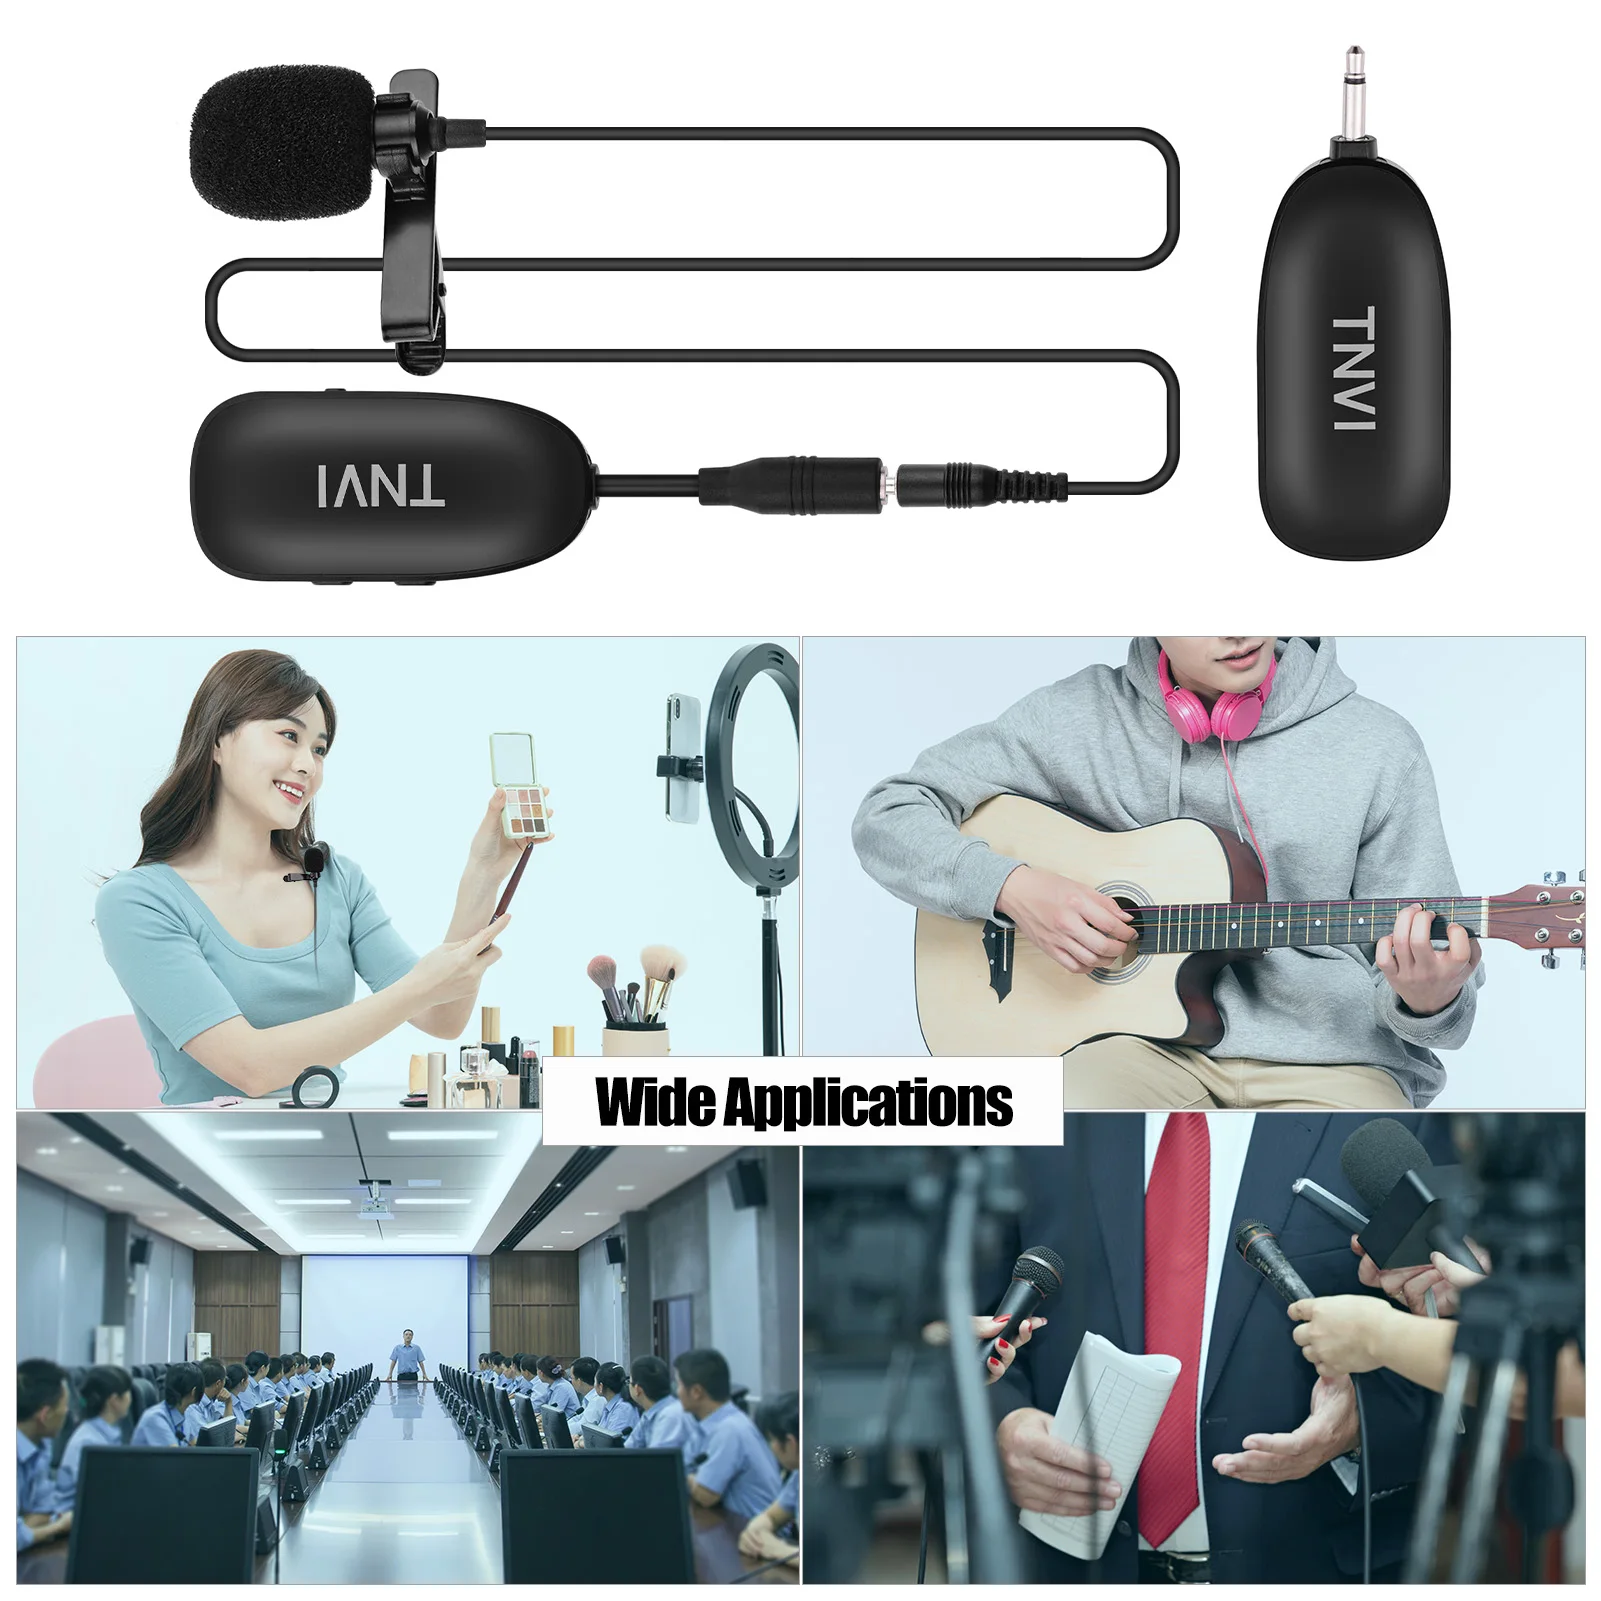 

TNVI V1 2.4G Wireless Microphone System with Mini Rechargeable Transmitter & Reveiver Lapel Lavalier Microphone 3.5mm Plug